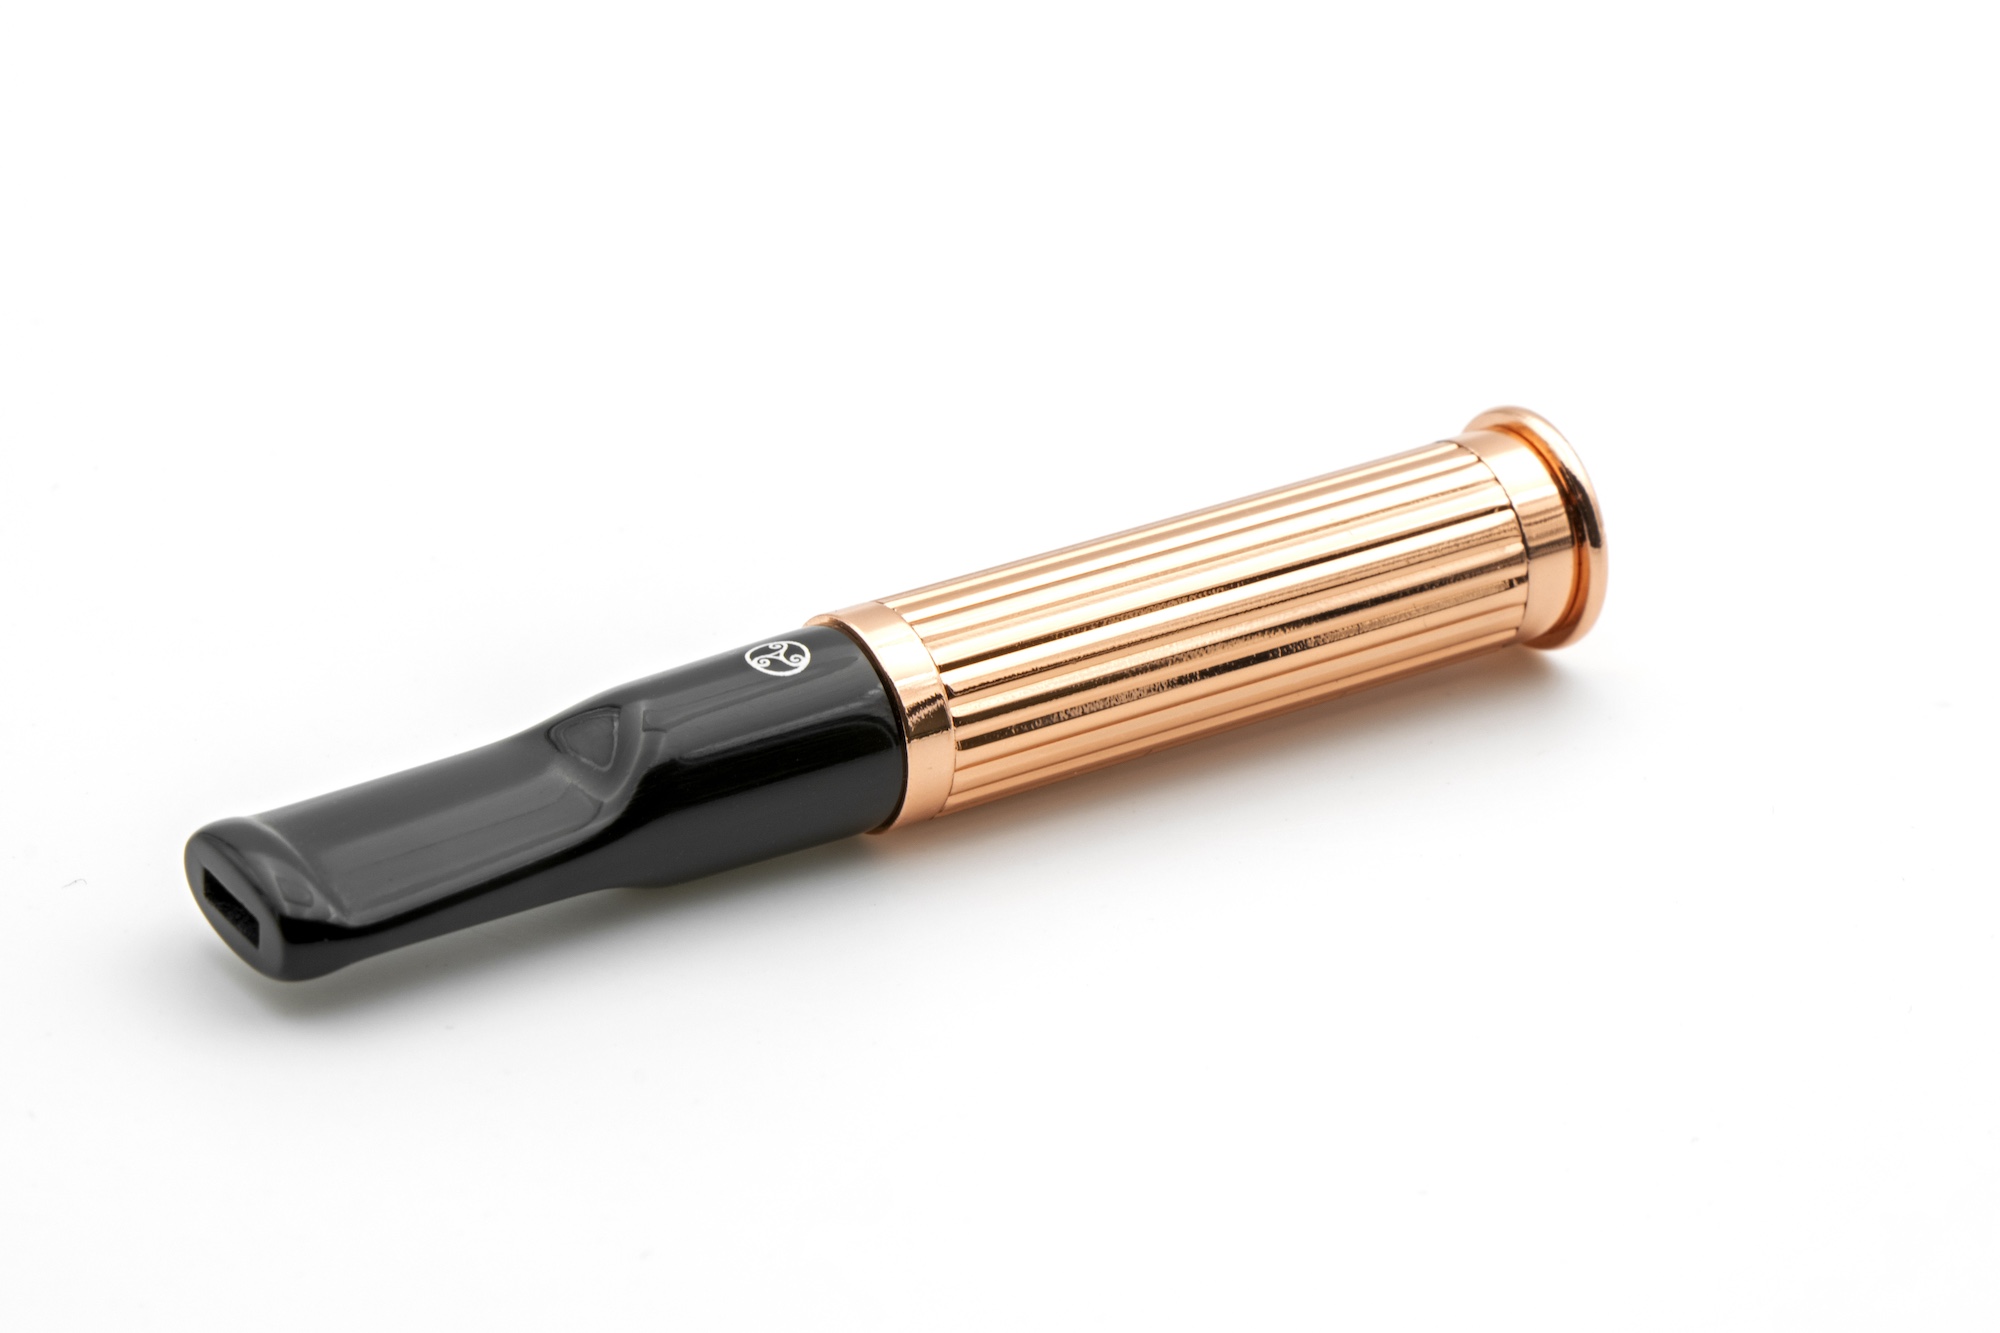 Rattray's Tuby Rose Gold Stripes